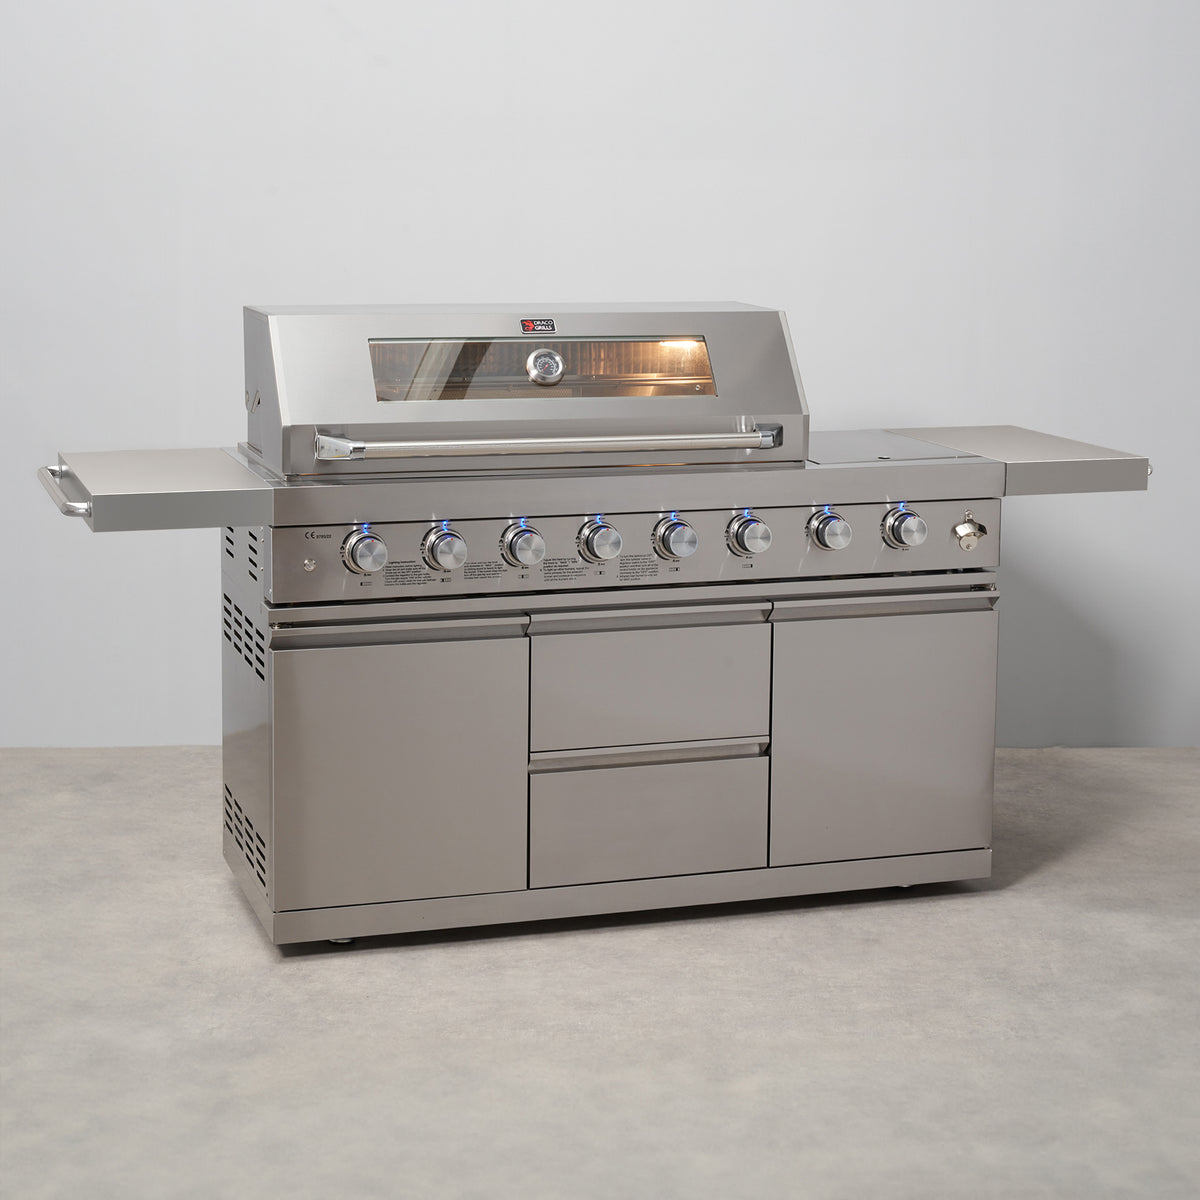 Draco Grills Z650 Deluxe 6 Burner Stainless Steel Barbecue with Integrated Sear Station